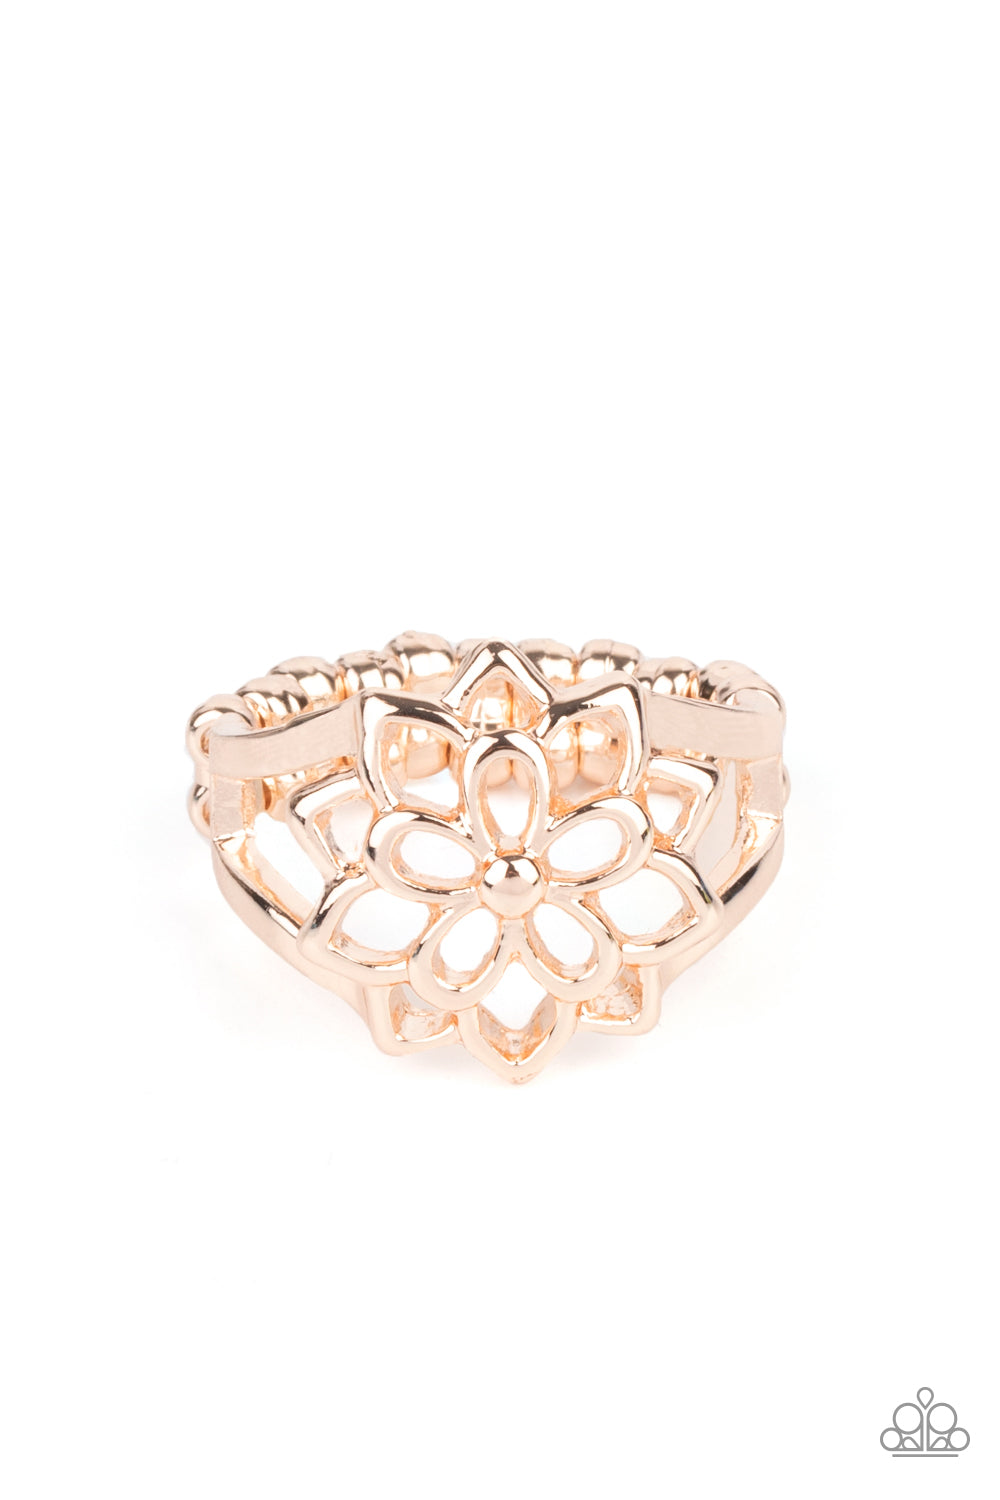 Prana Paradise - Rose Gold ***COMING SOON*** - Bling With Crystal